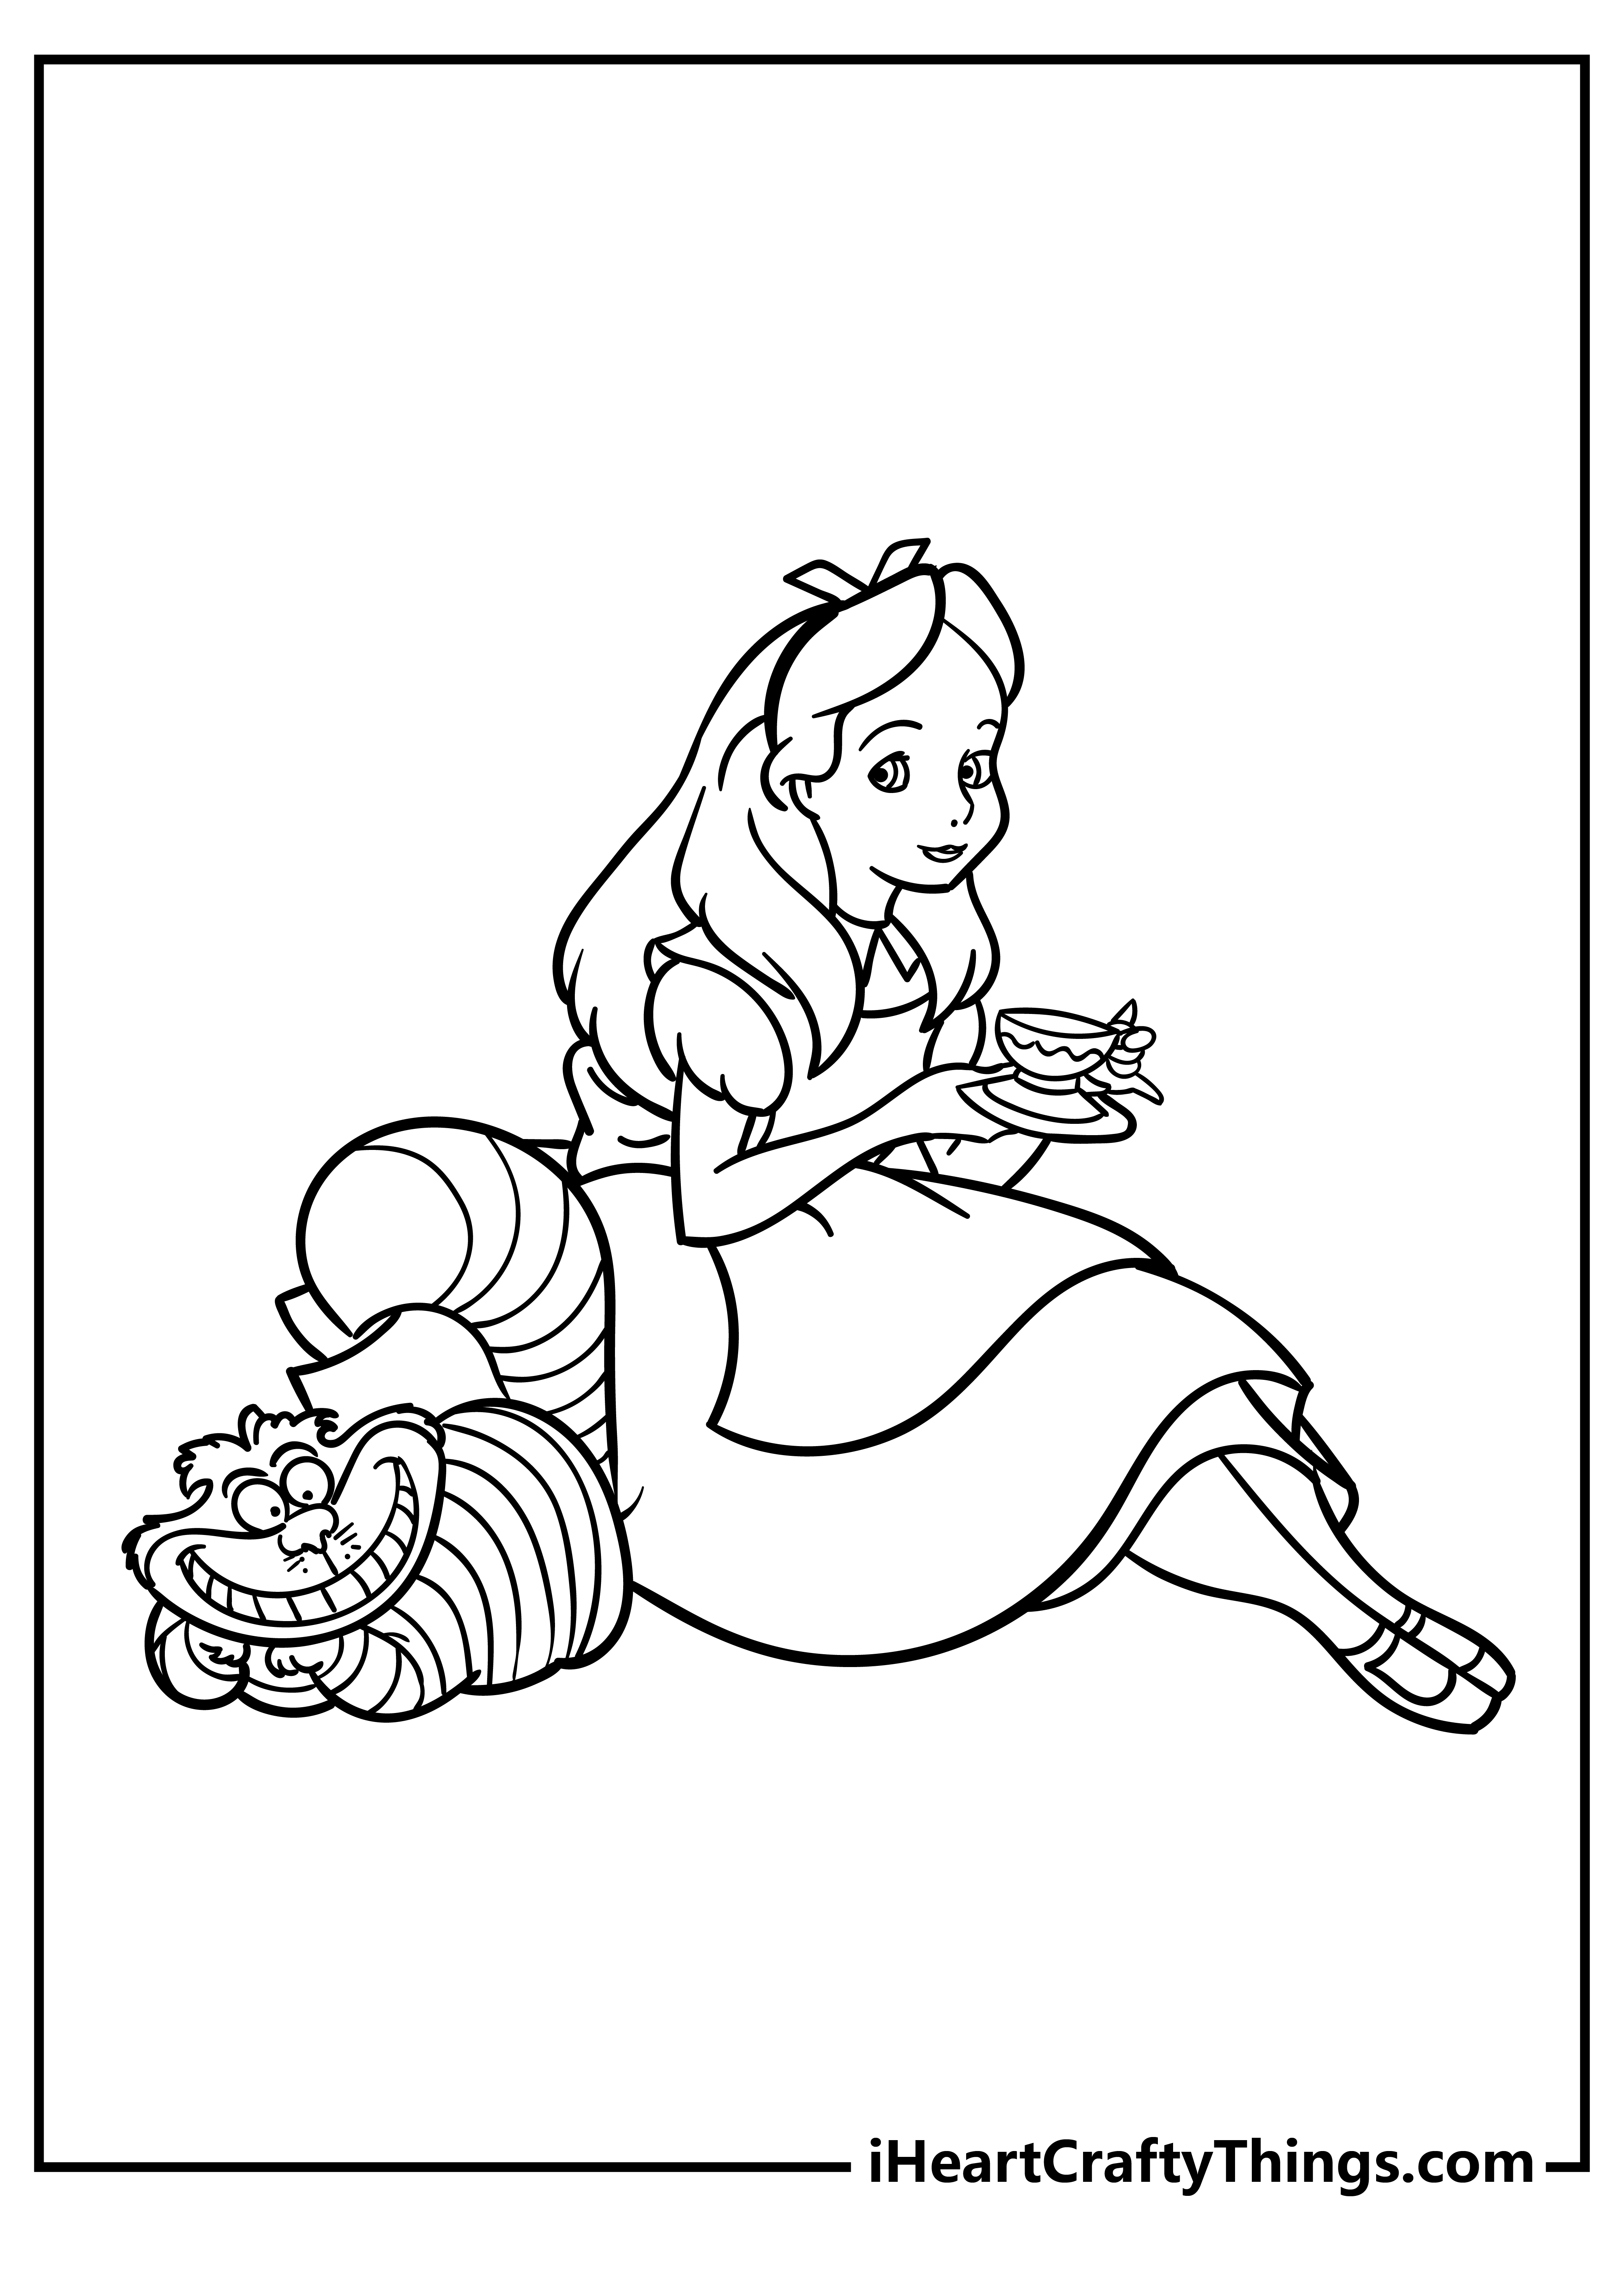 Alice In Wonderland Coloring Pages for preschoolers free printable